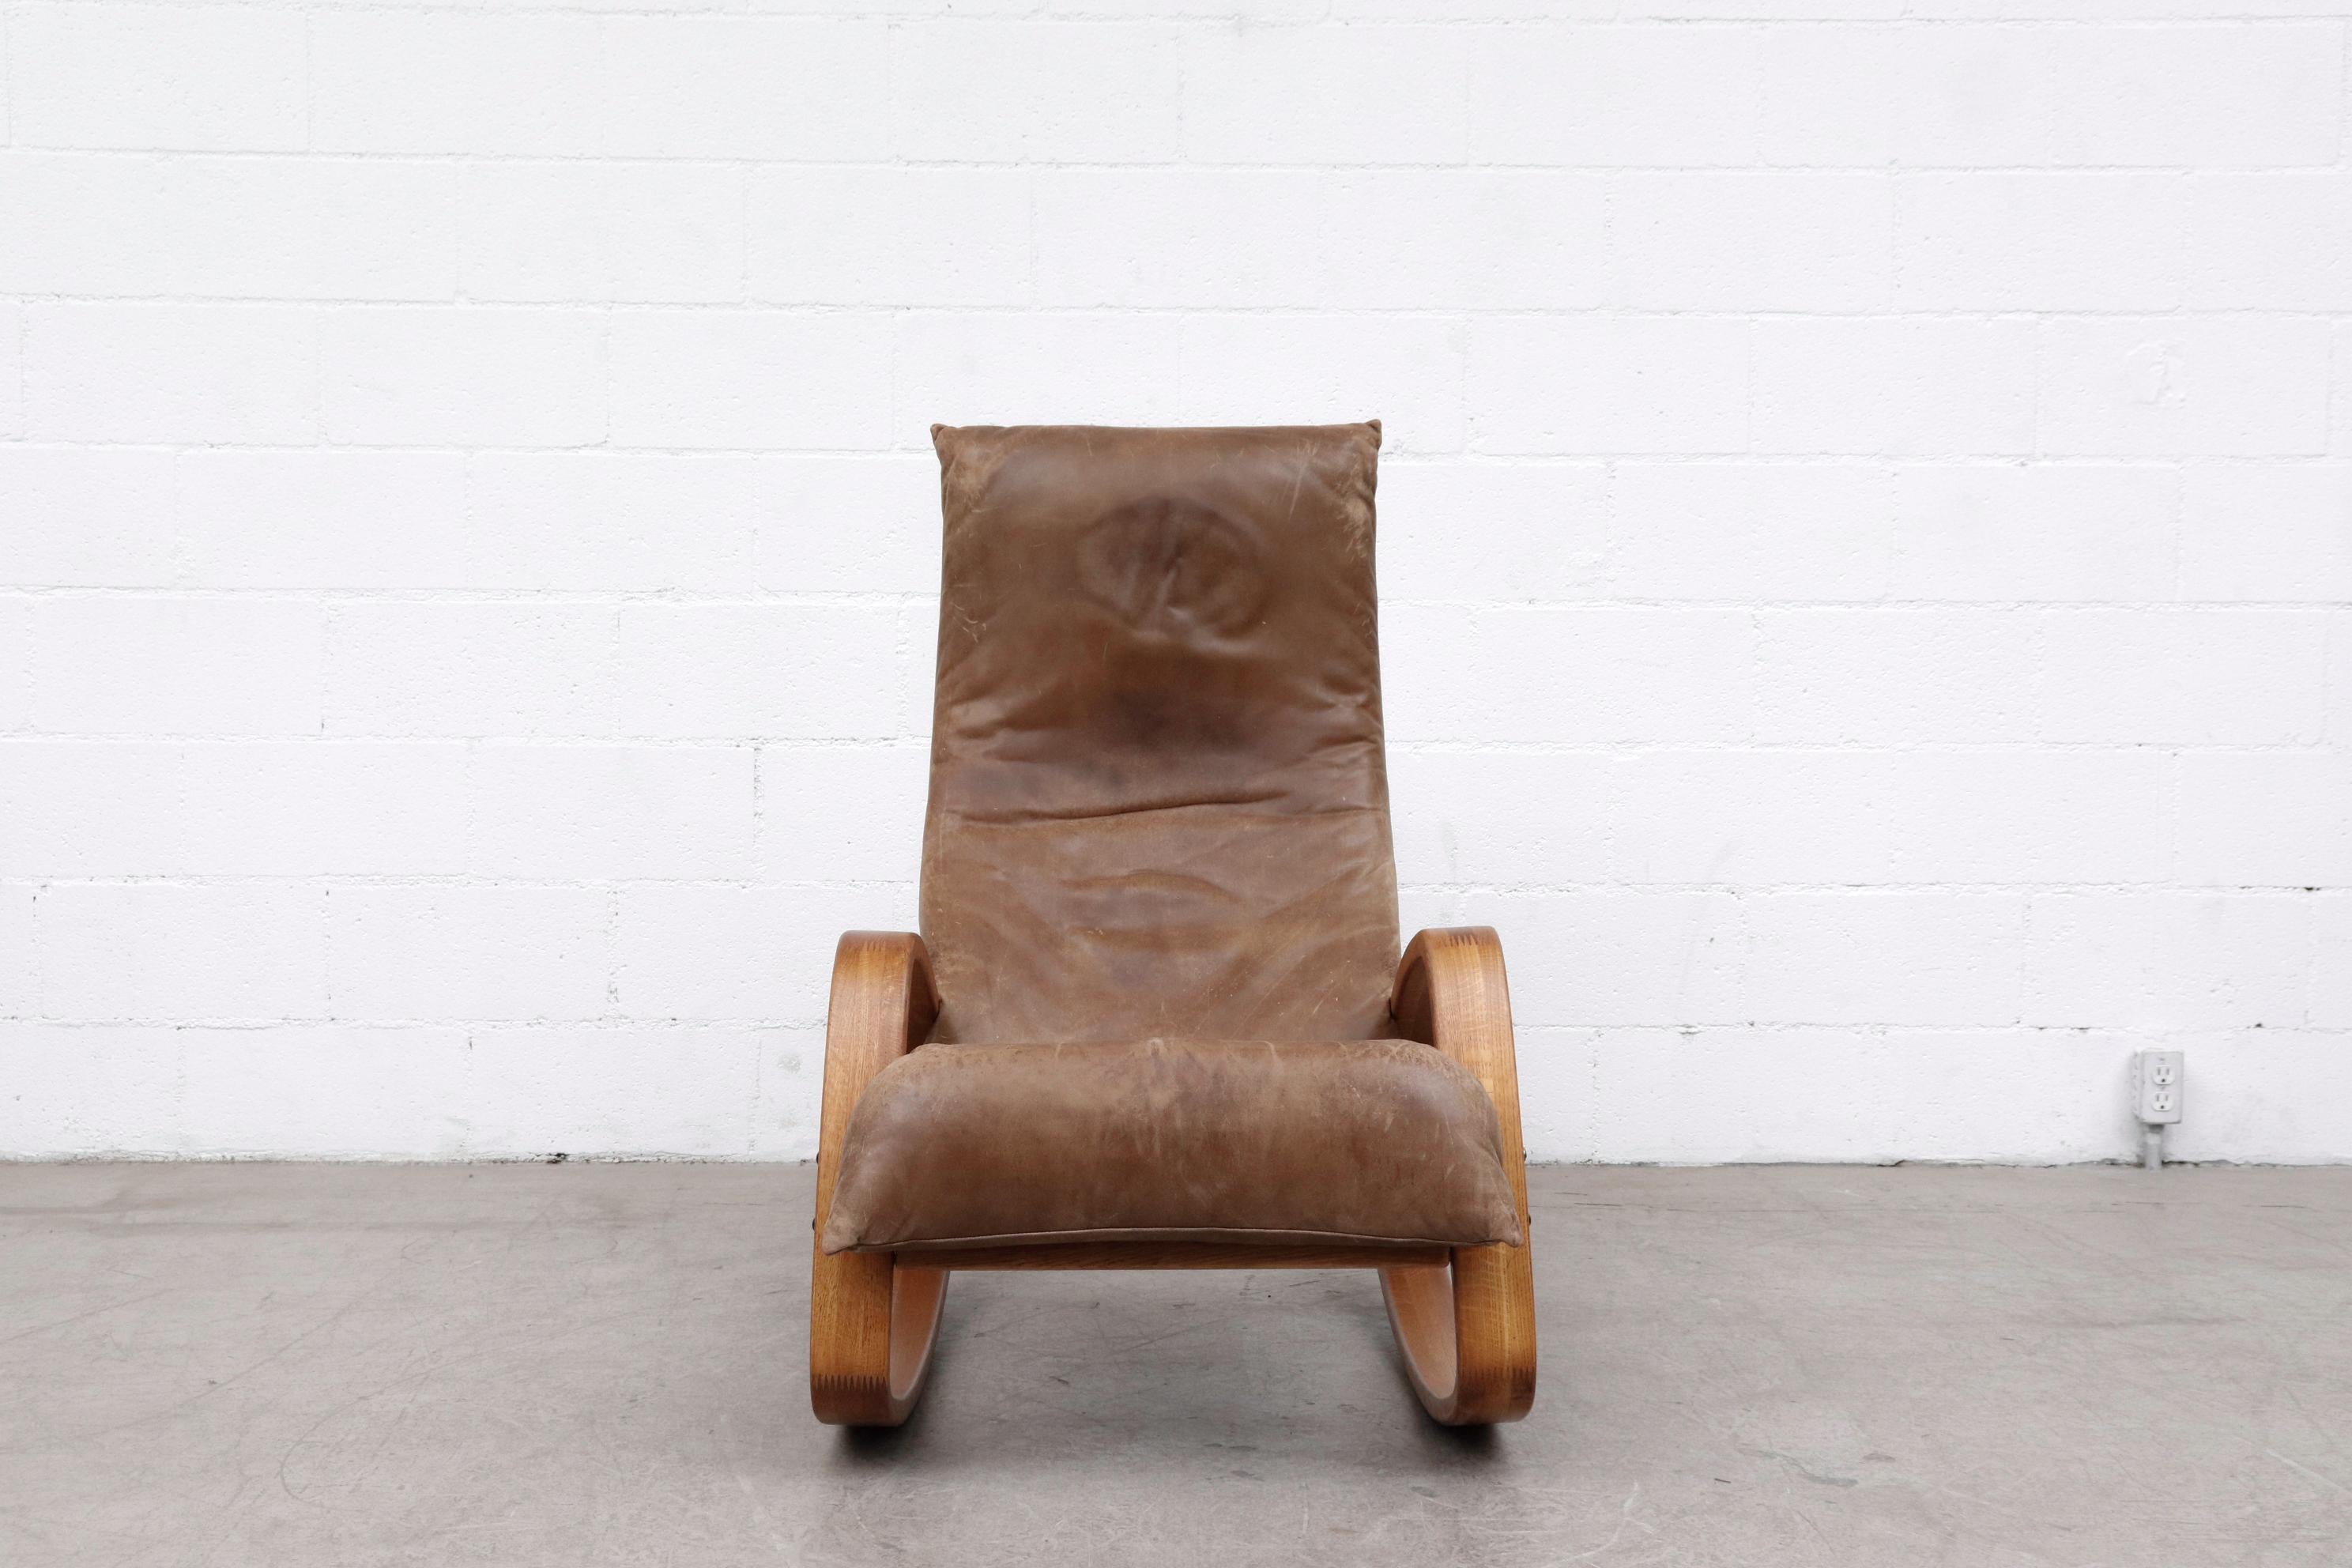 Midcentury Gerard Van Den Berg high back natural leather rocking chair with bent oak elliptical legs. Leather and frame have visible patina. In original condition with wear consistent with age and use.